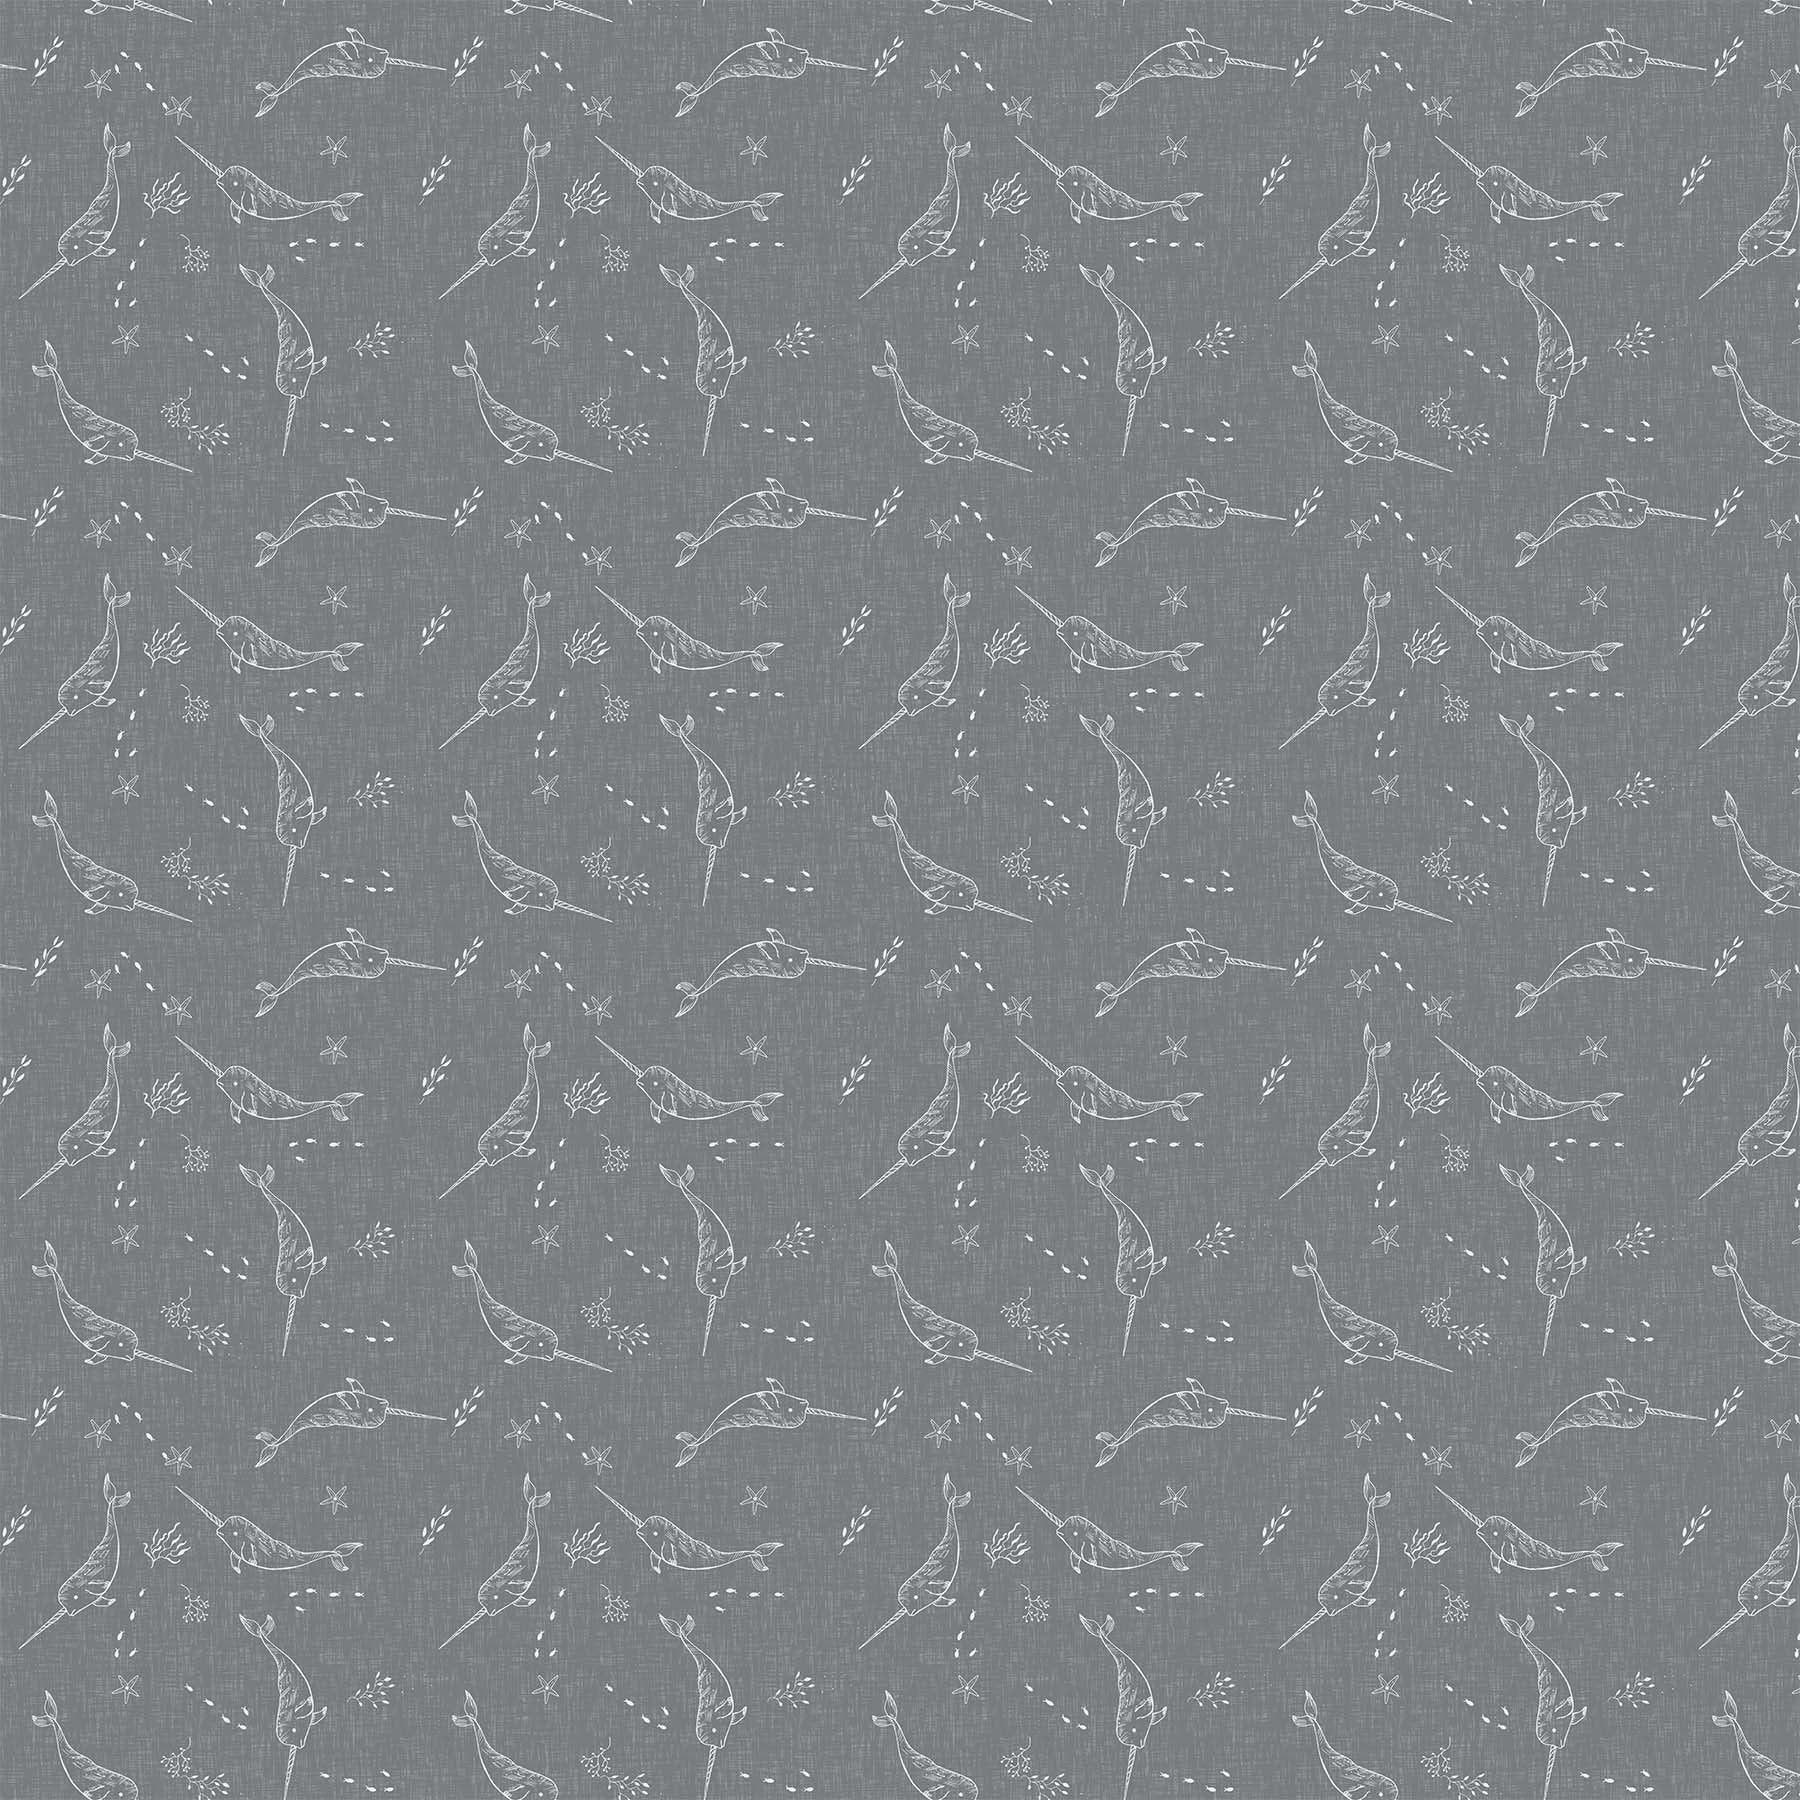 Calm Waters - Narwhal, Grey